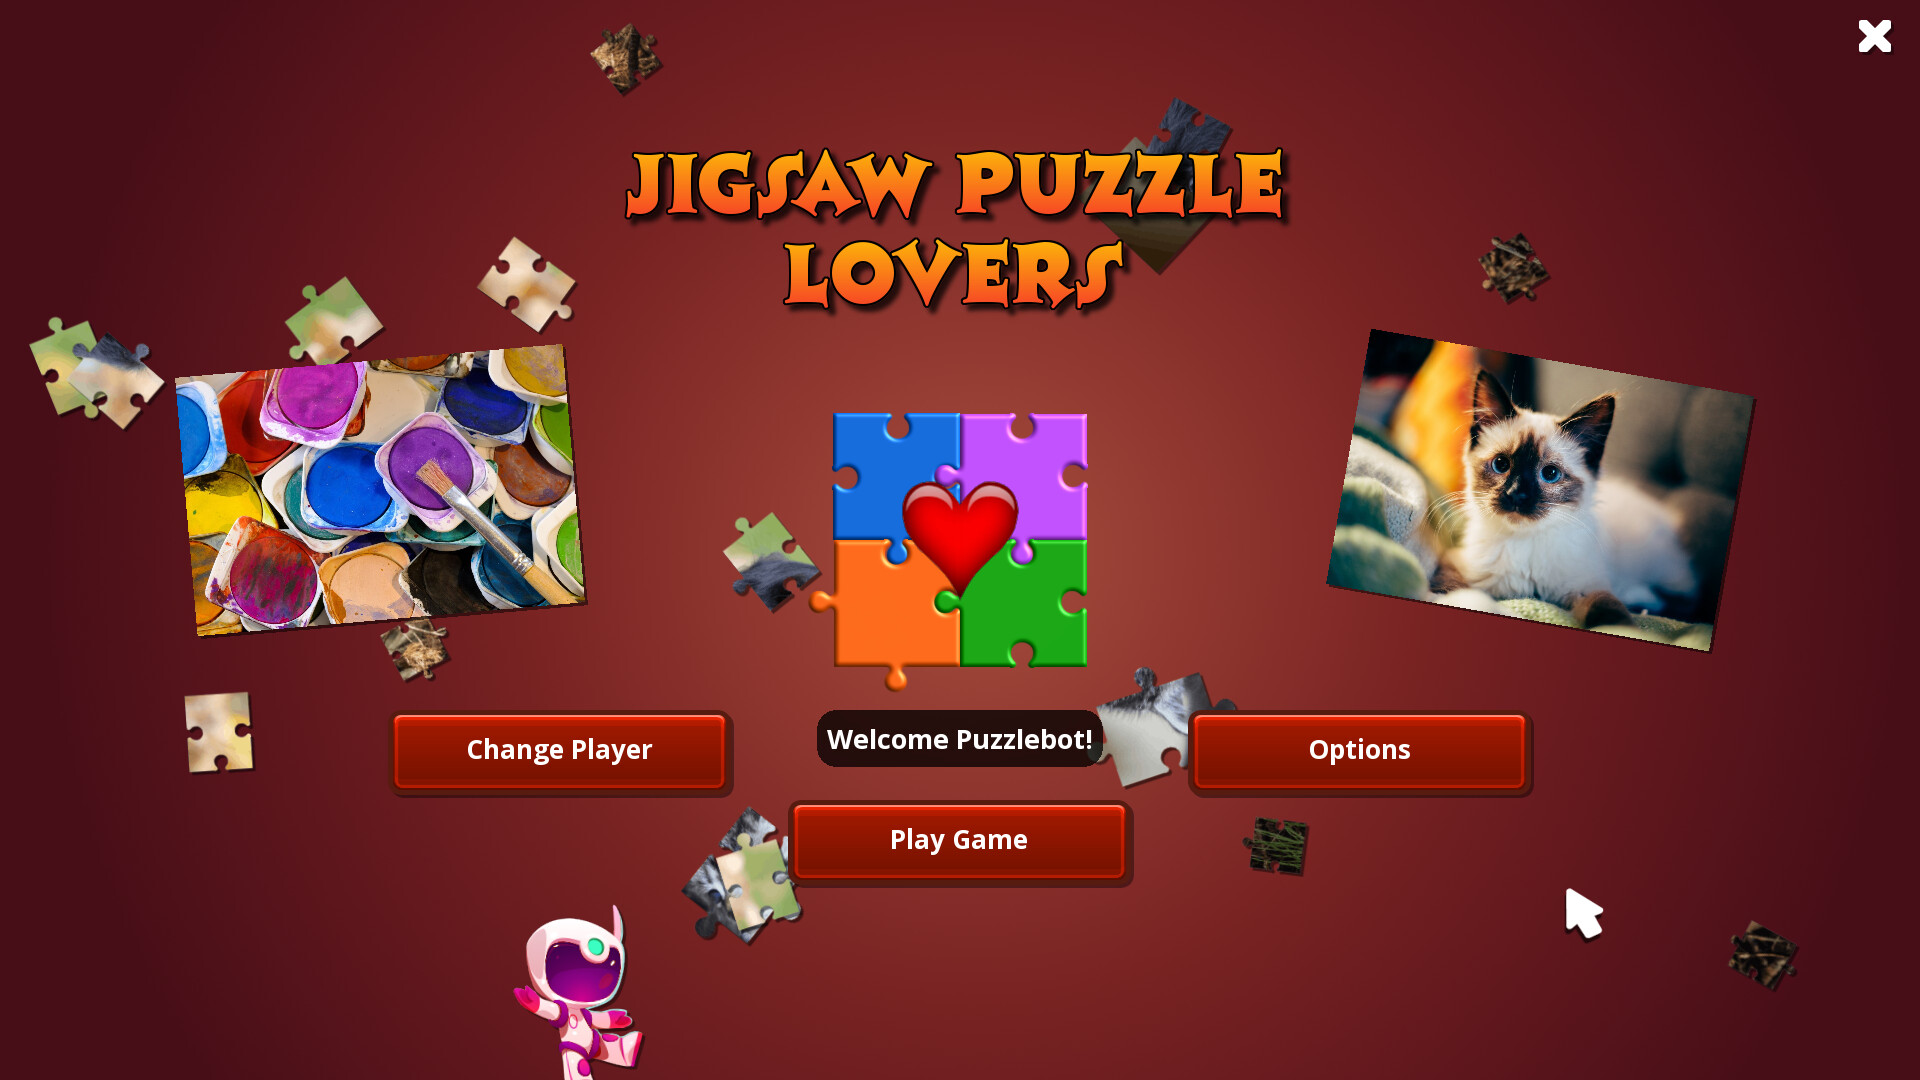 Jigsaw Puzzle Lovers Steam CD Key, $0.96